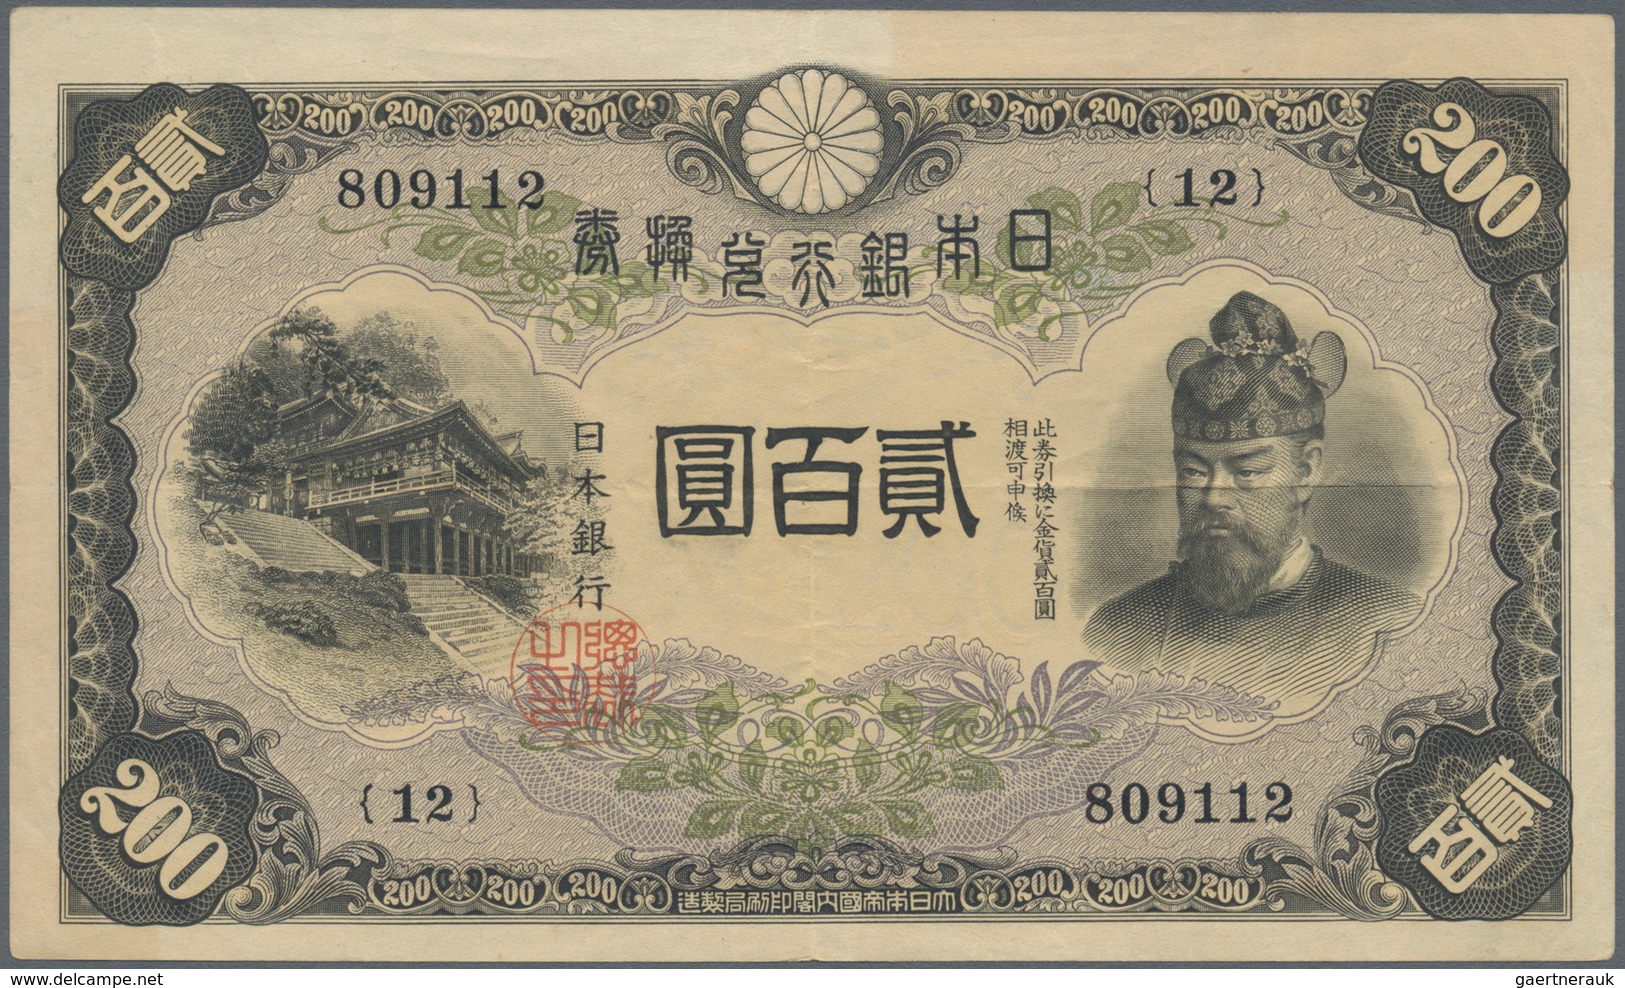 01893 Japan: 200 Yen ND P. 44a, Used With Center Fold, Light Creases In Paper But Very Crisp Original With - Japón